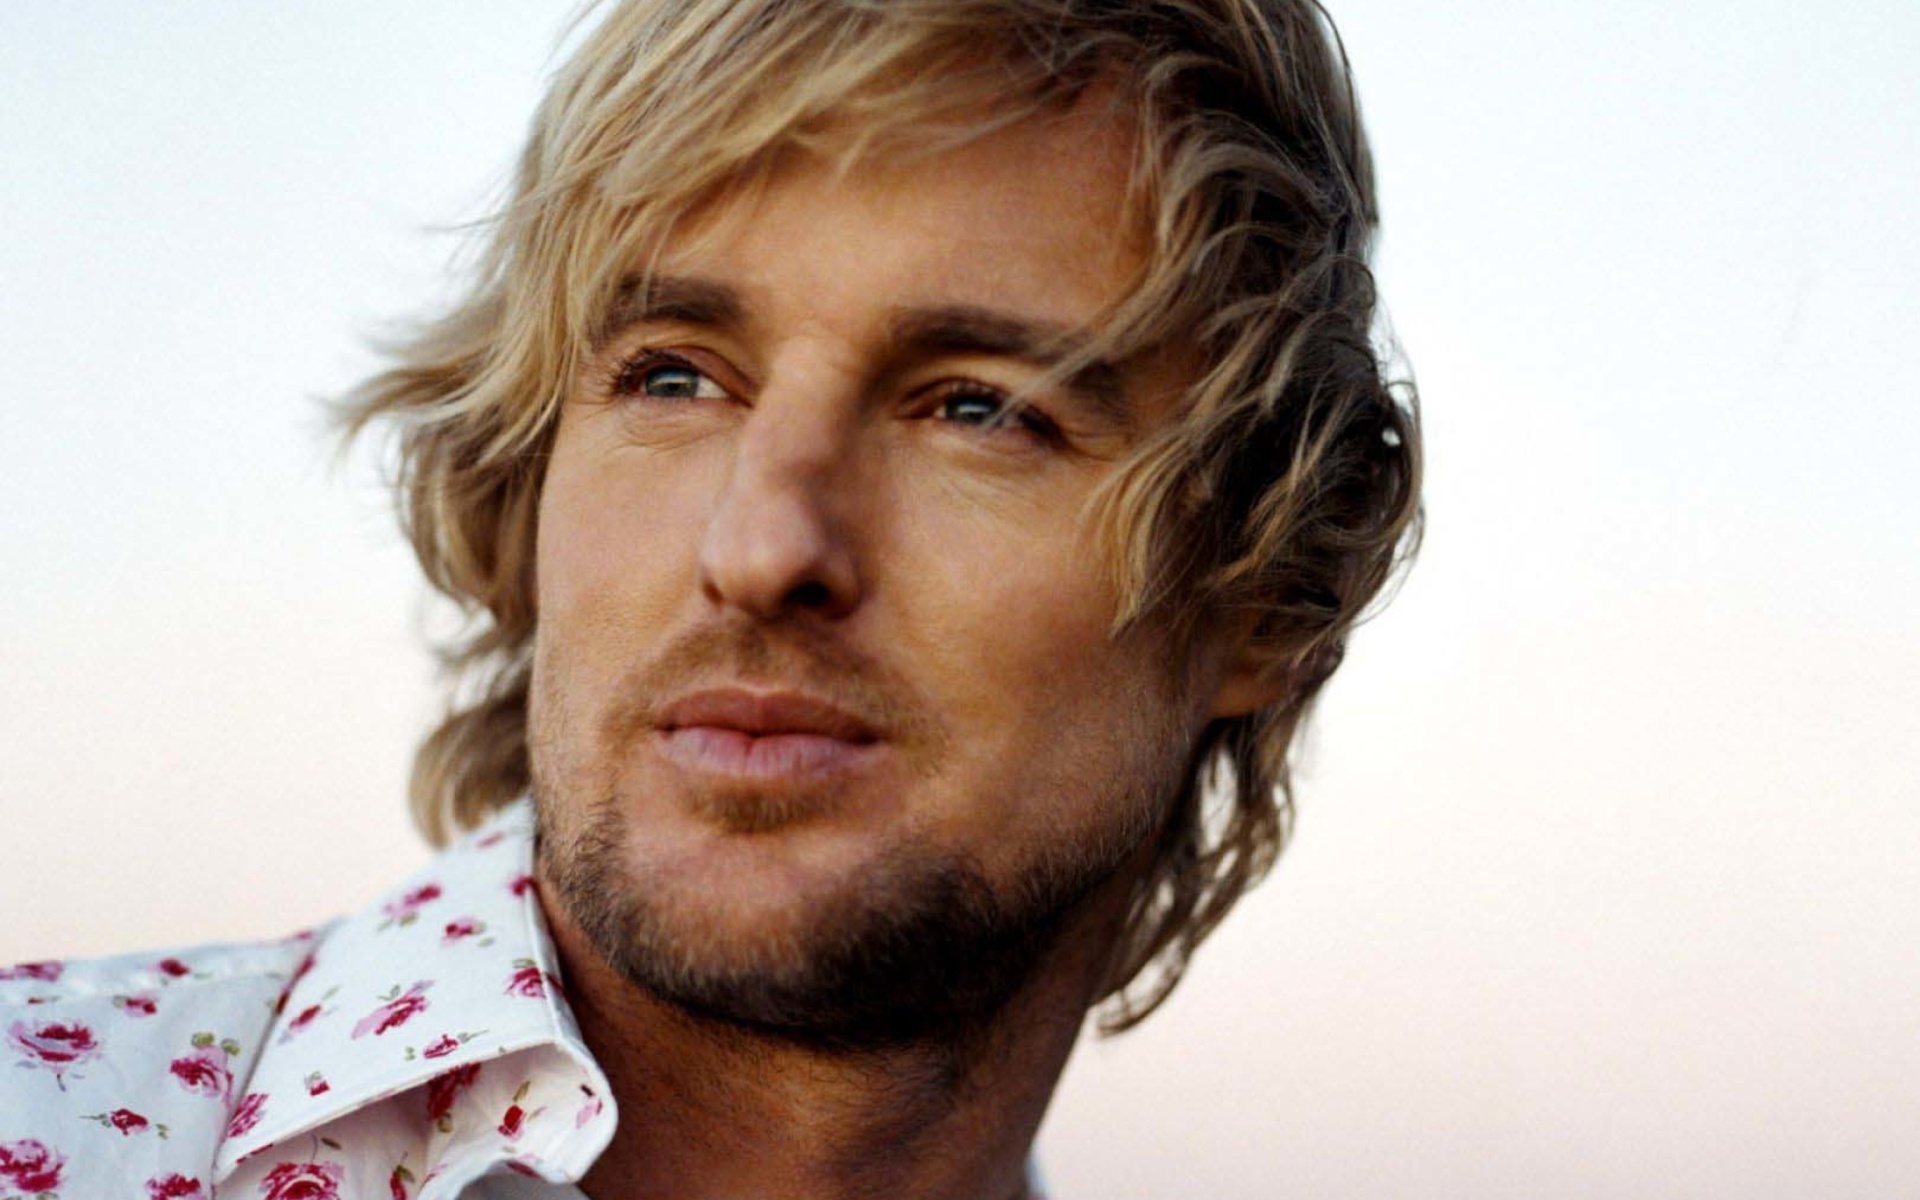 Owen Wilson: Actor, Known for voicing McQueen in Cars 2. 1920x1200 HD Wallpaper.